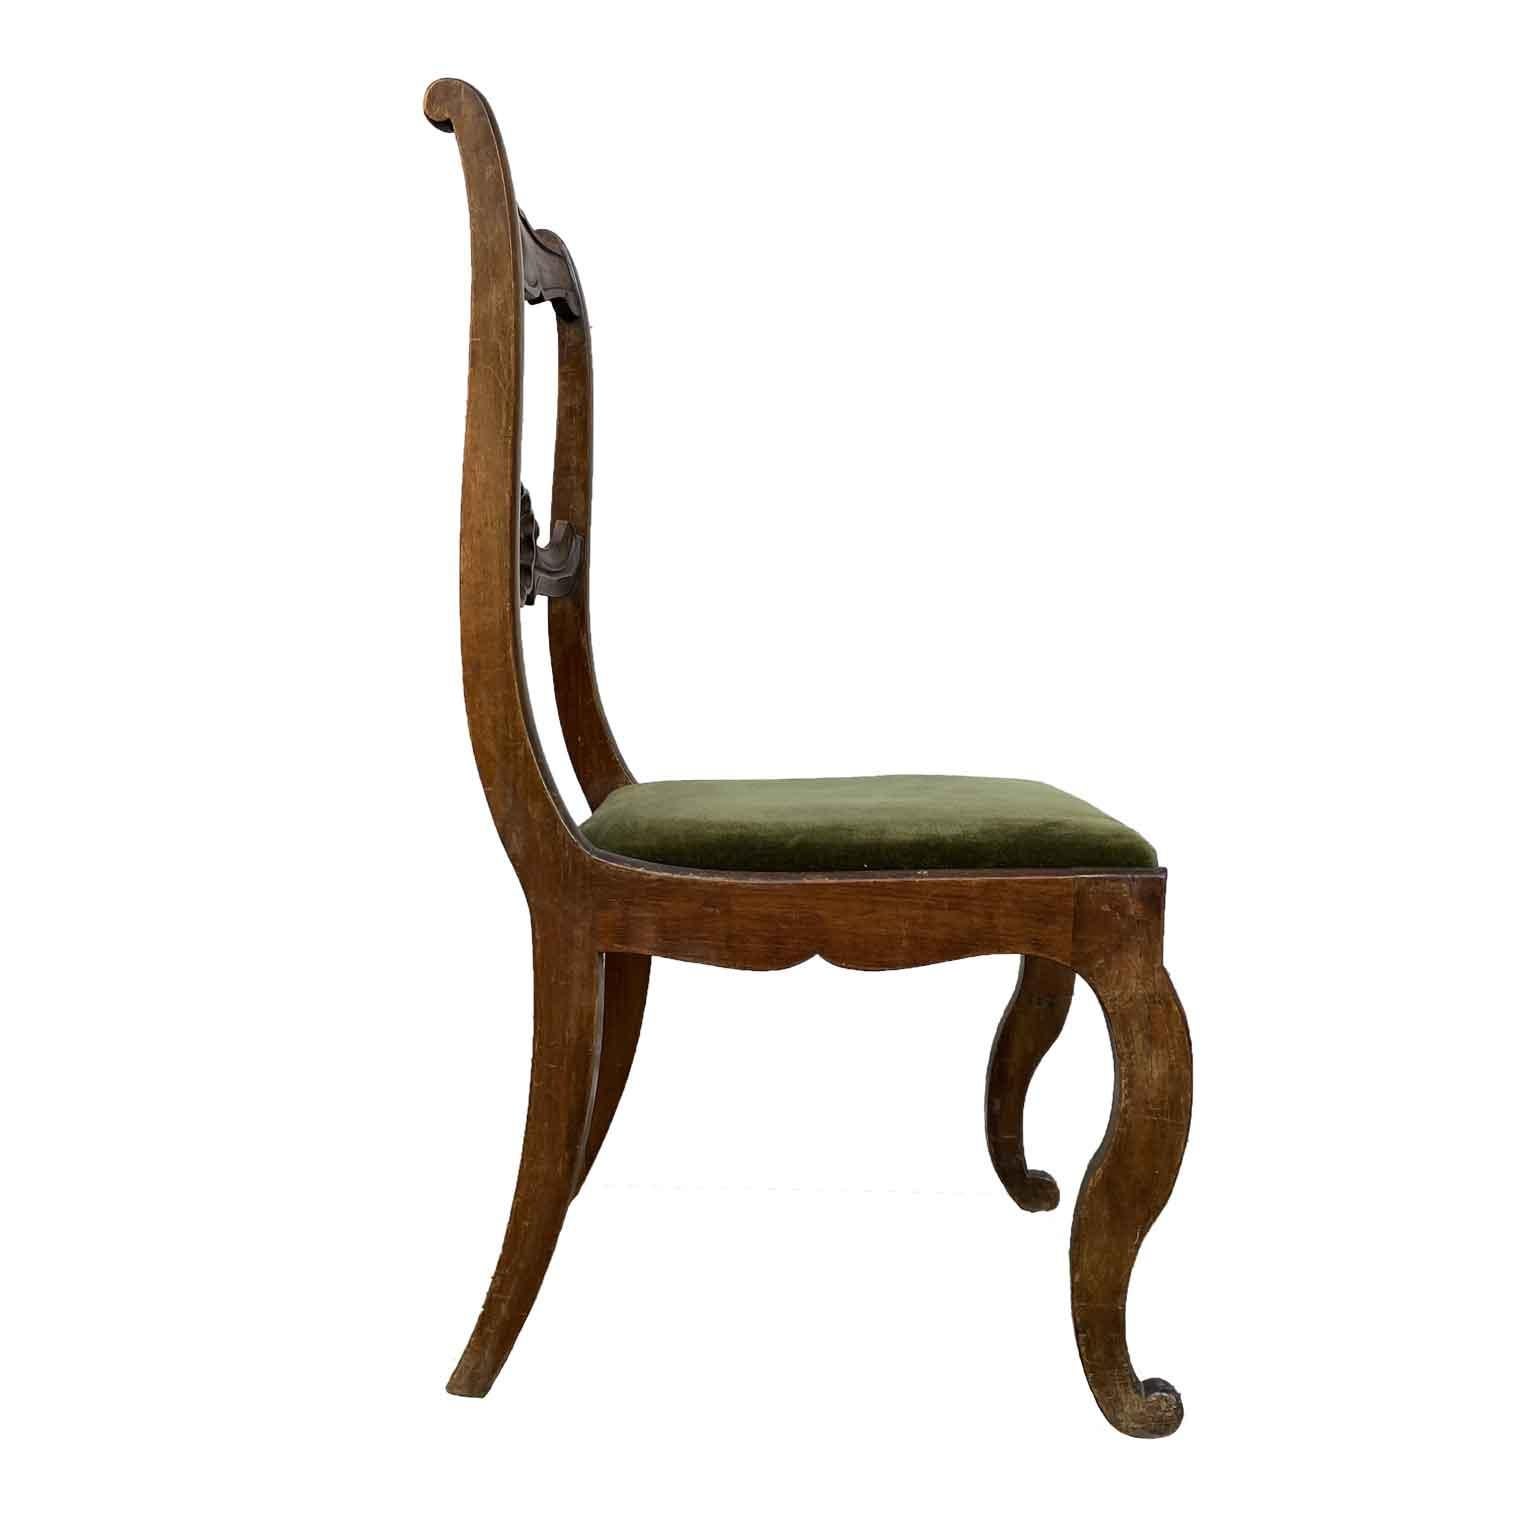 Six Italian Carved Walnut Chairs from the late 1800s with seat to be renewed in green velvet. The six chairs are in good joinery condition,  walnut structure is solid, but they need a  polishing and reupholstery of the green velvet fabric and